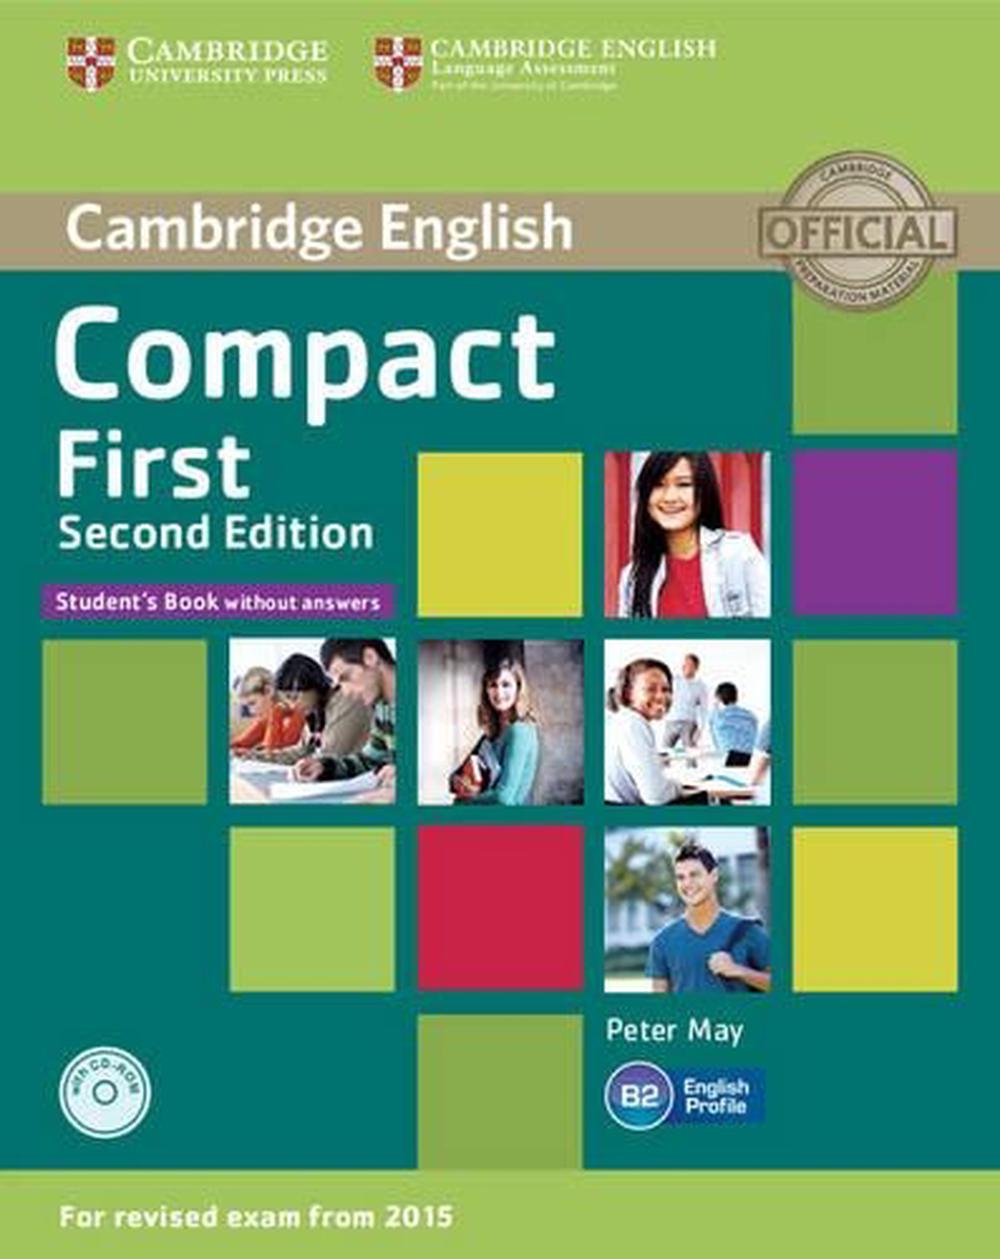 Answers　Book　Peter　9781107428423　by　Compact　Buy　The　Student's　without　Book　CD-ROM　First　at　Merchandise,　online　May,　with　Nile